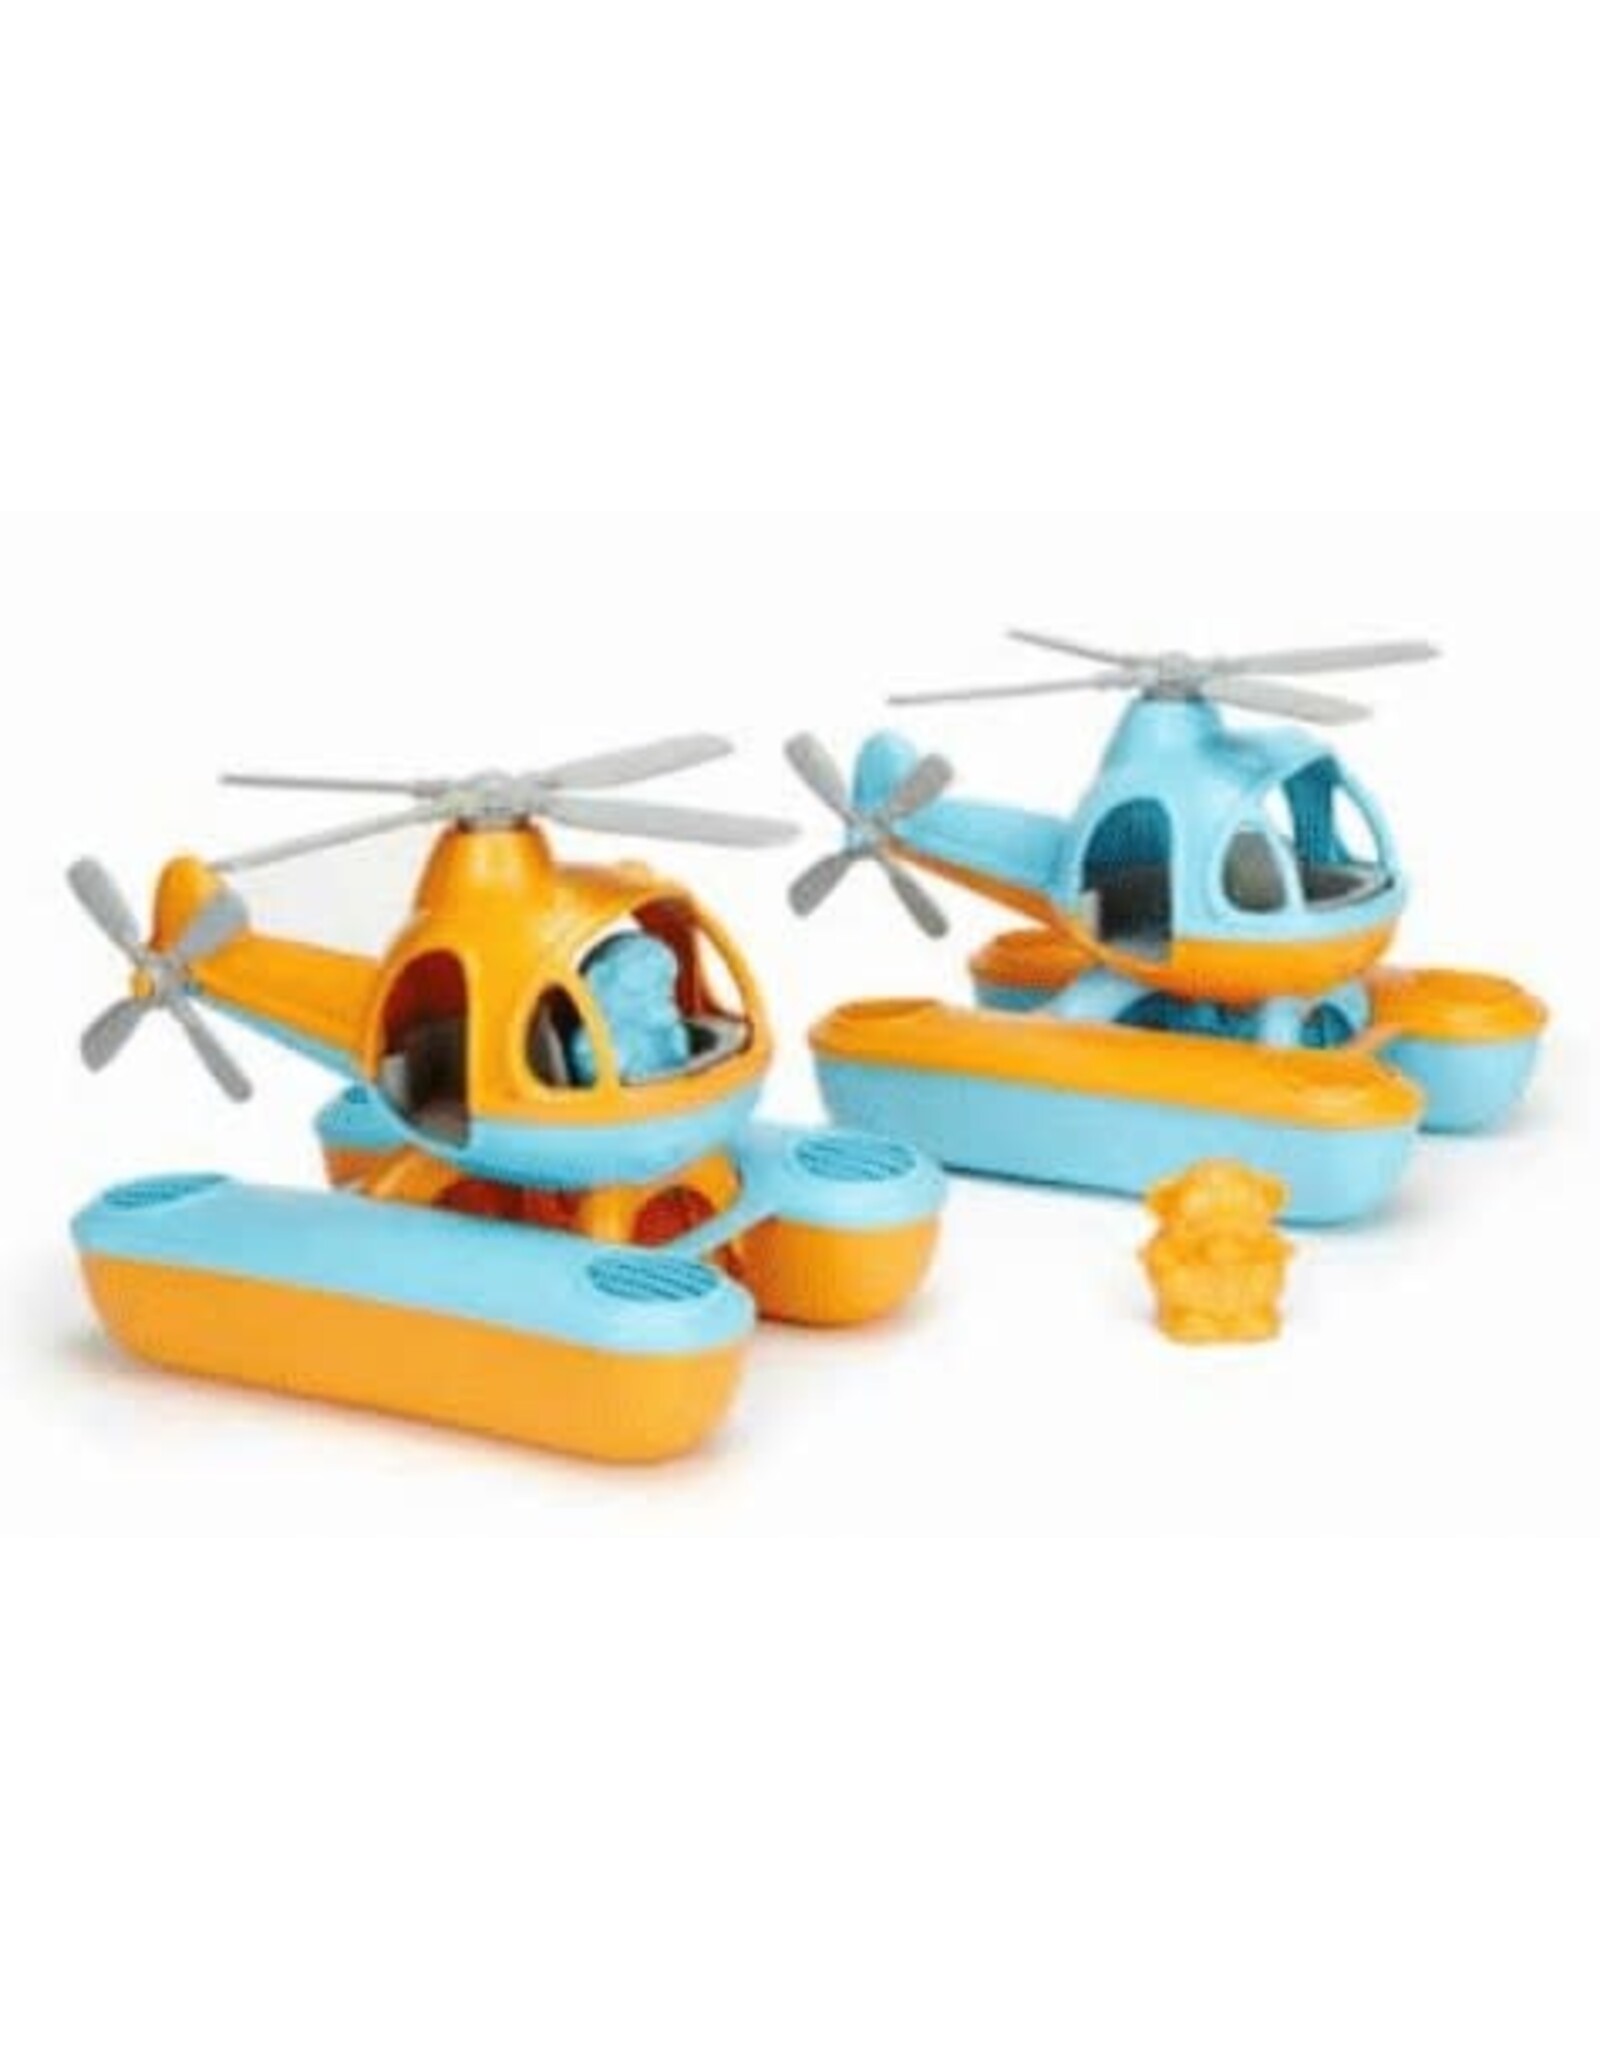 Green Toys Seacopter - Assorted Colors